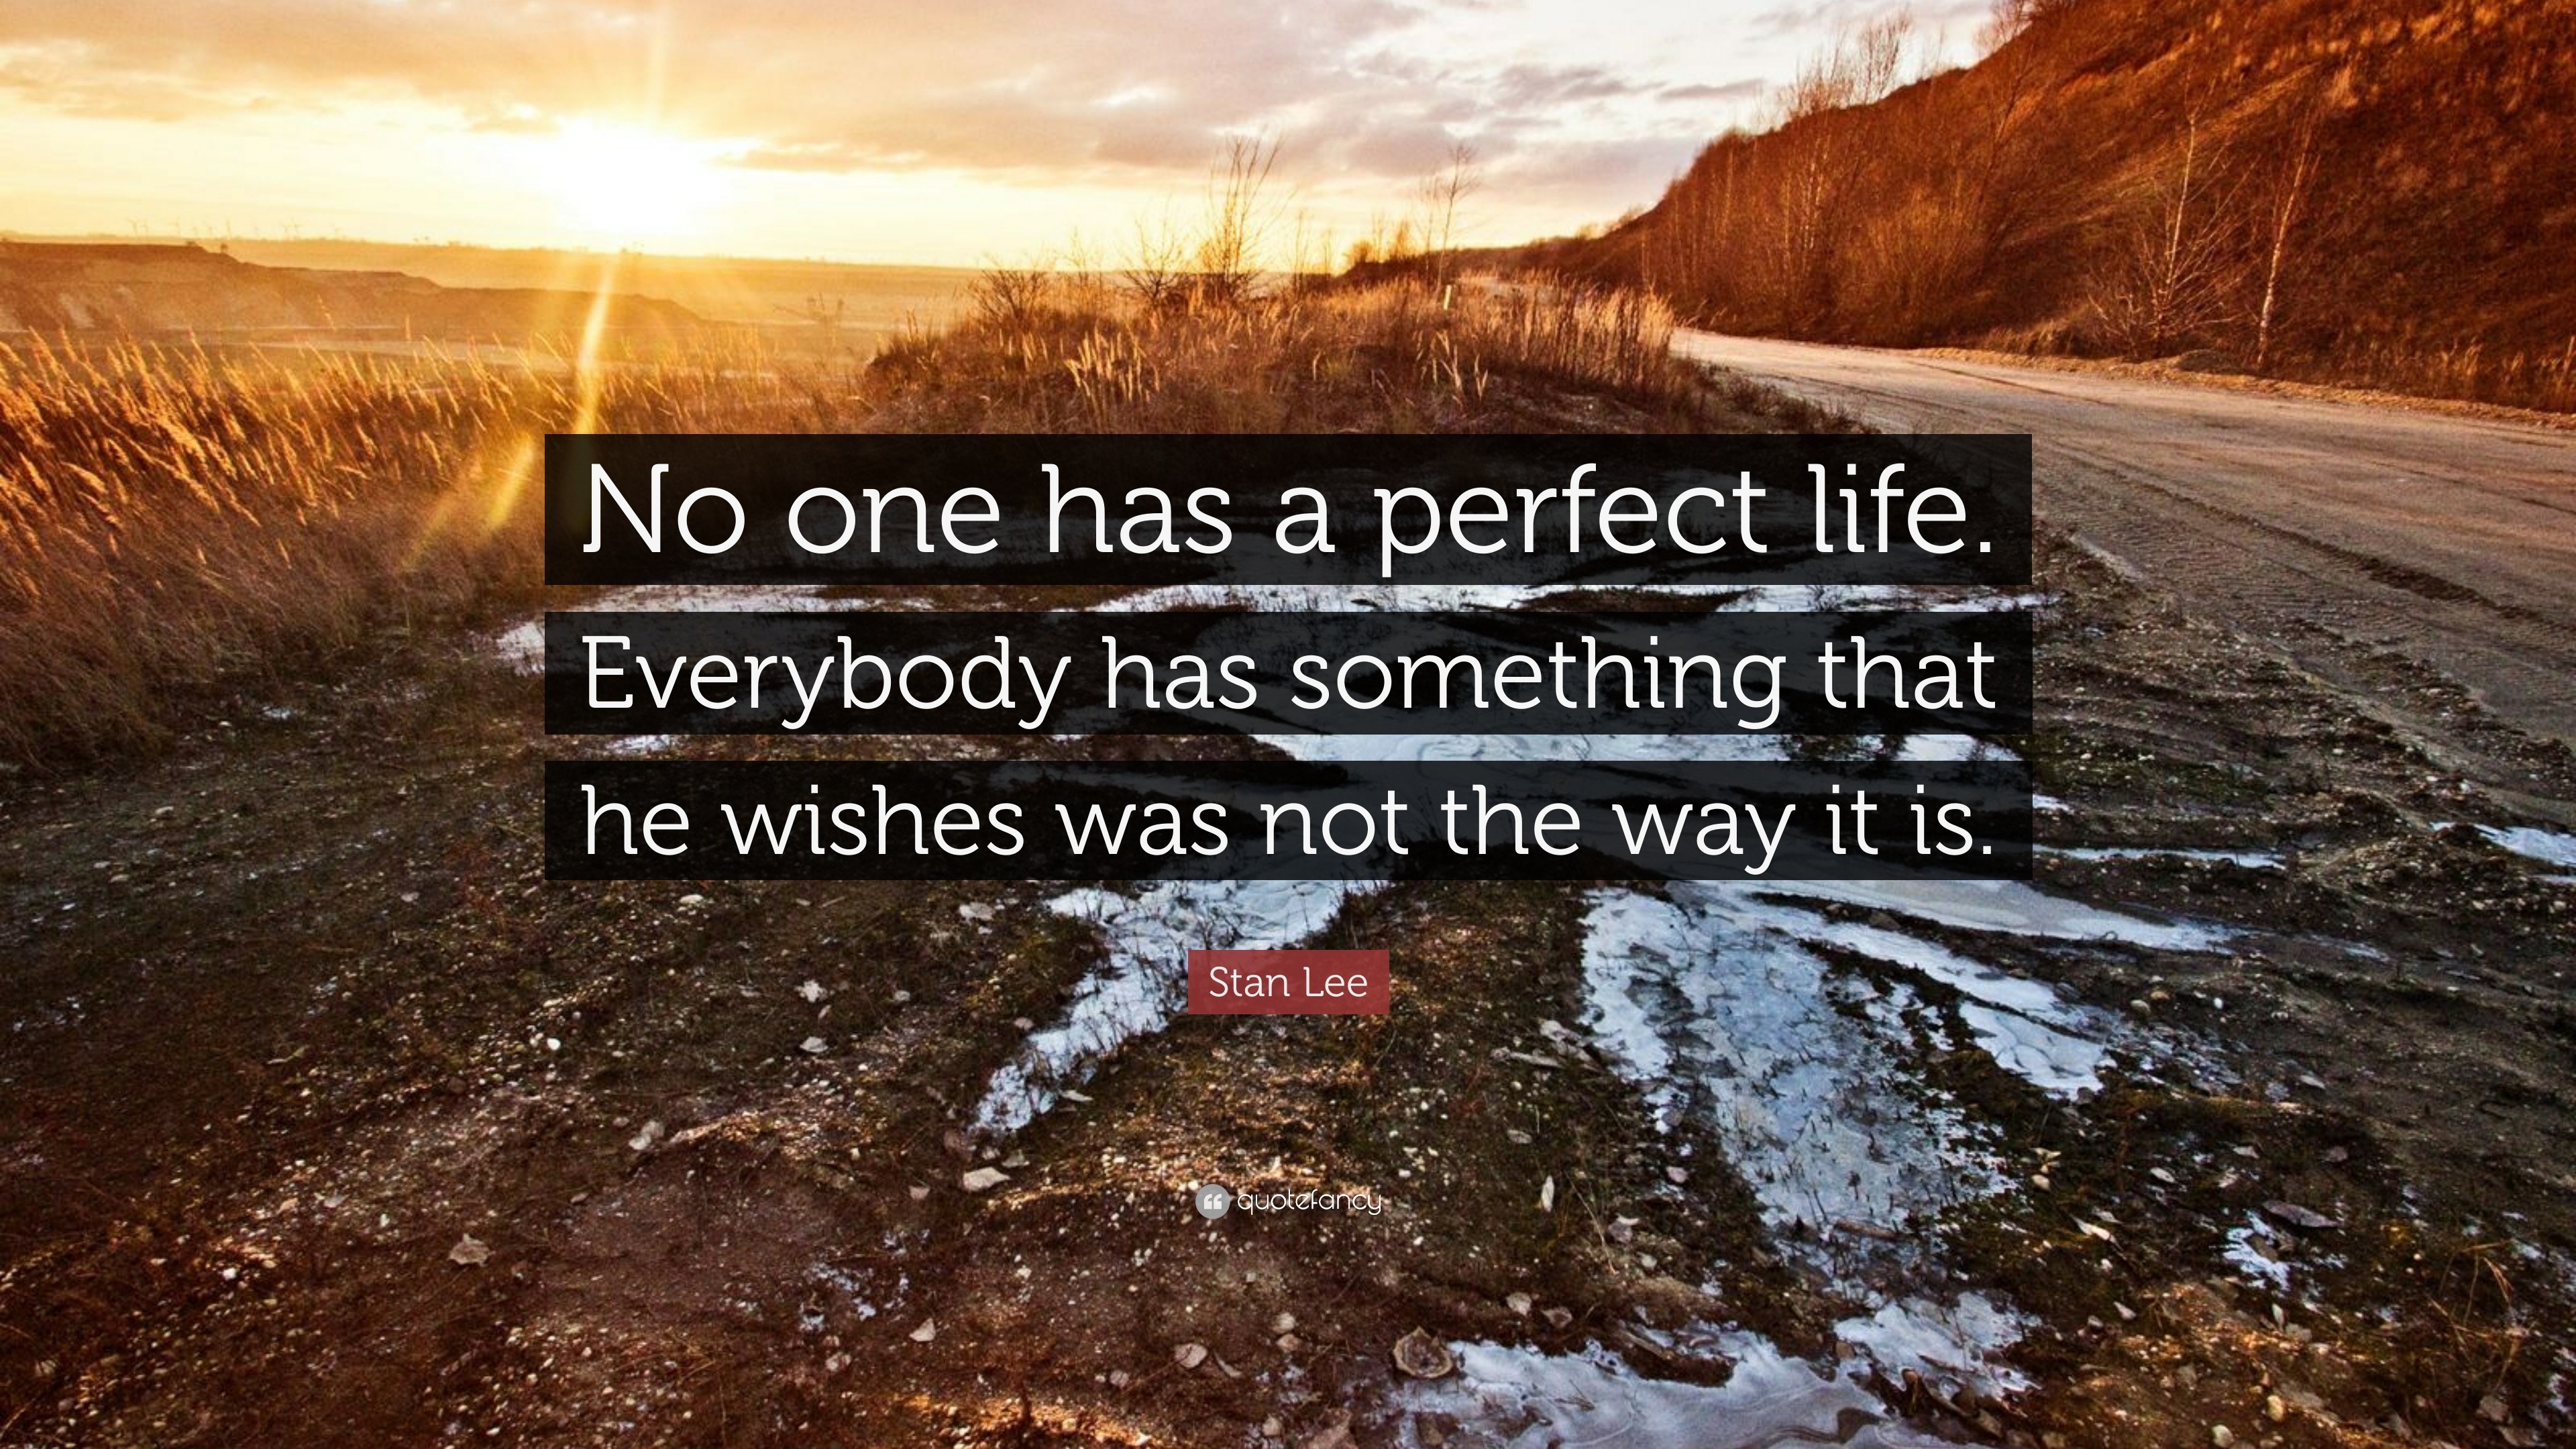 Stan Lee Quote: “No one has a perfect life. Everybody has something ...